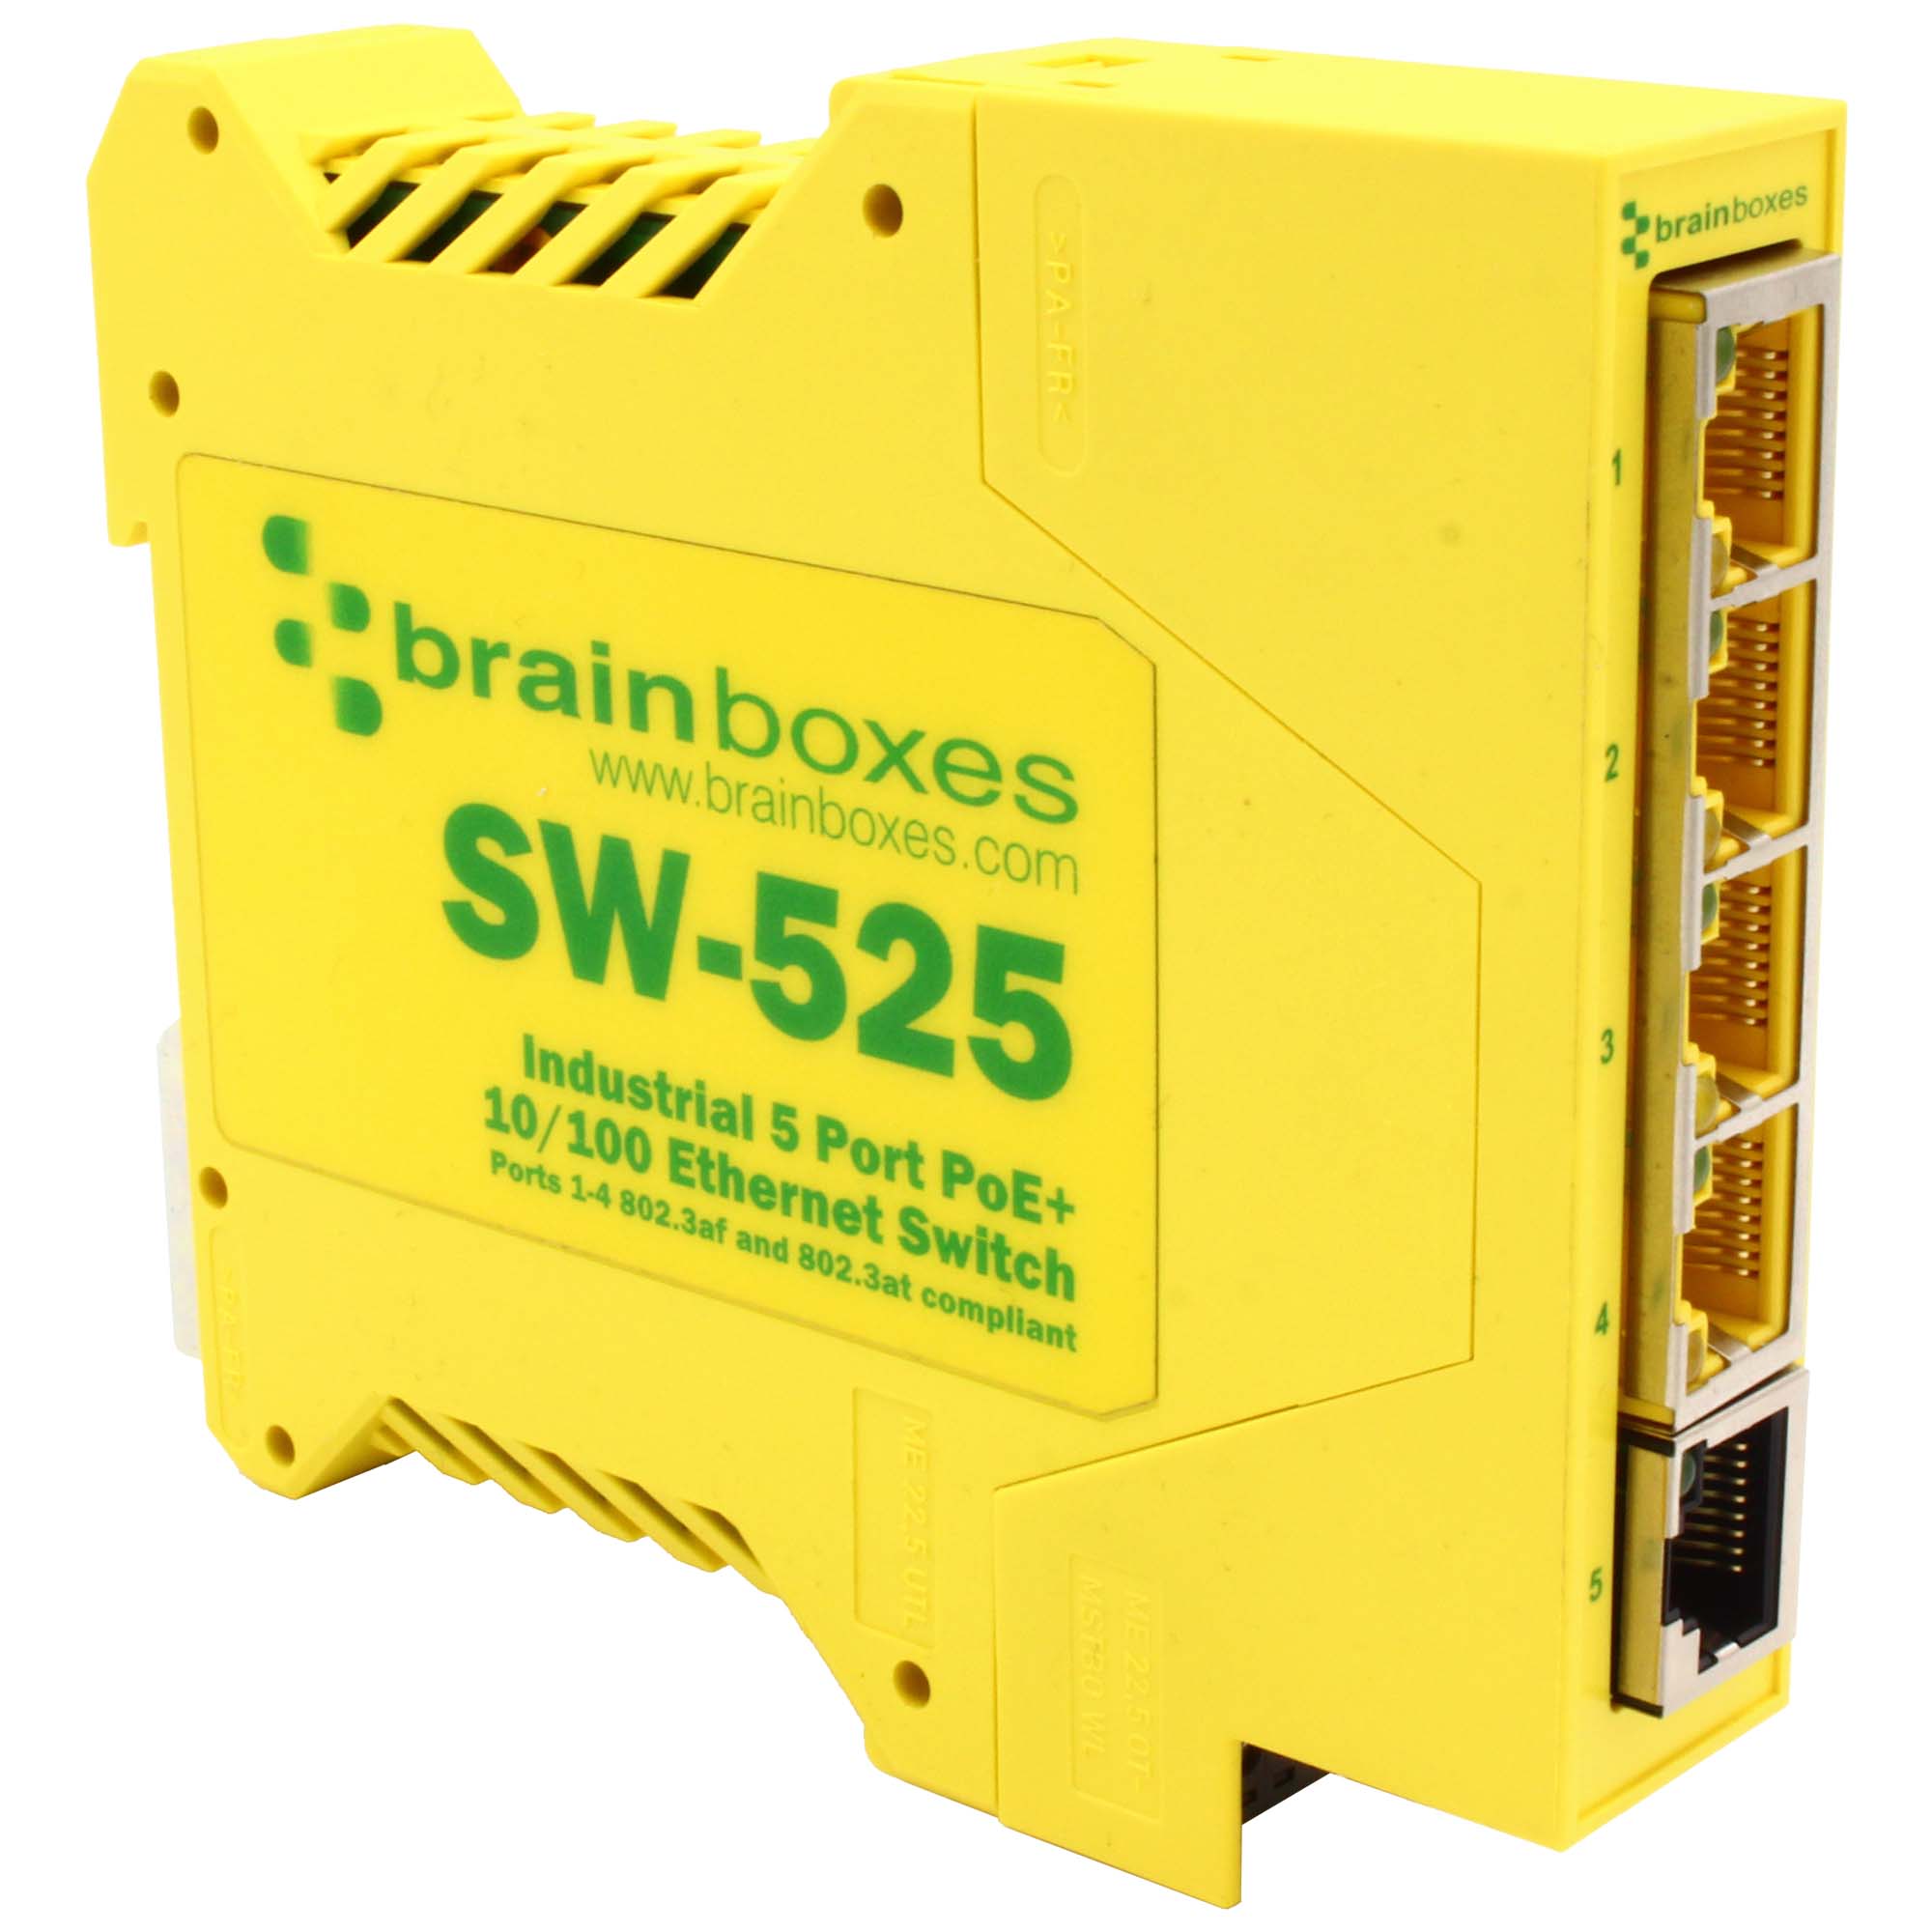 PoE Ethernet Switch | Brainboxes